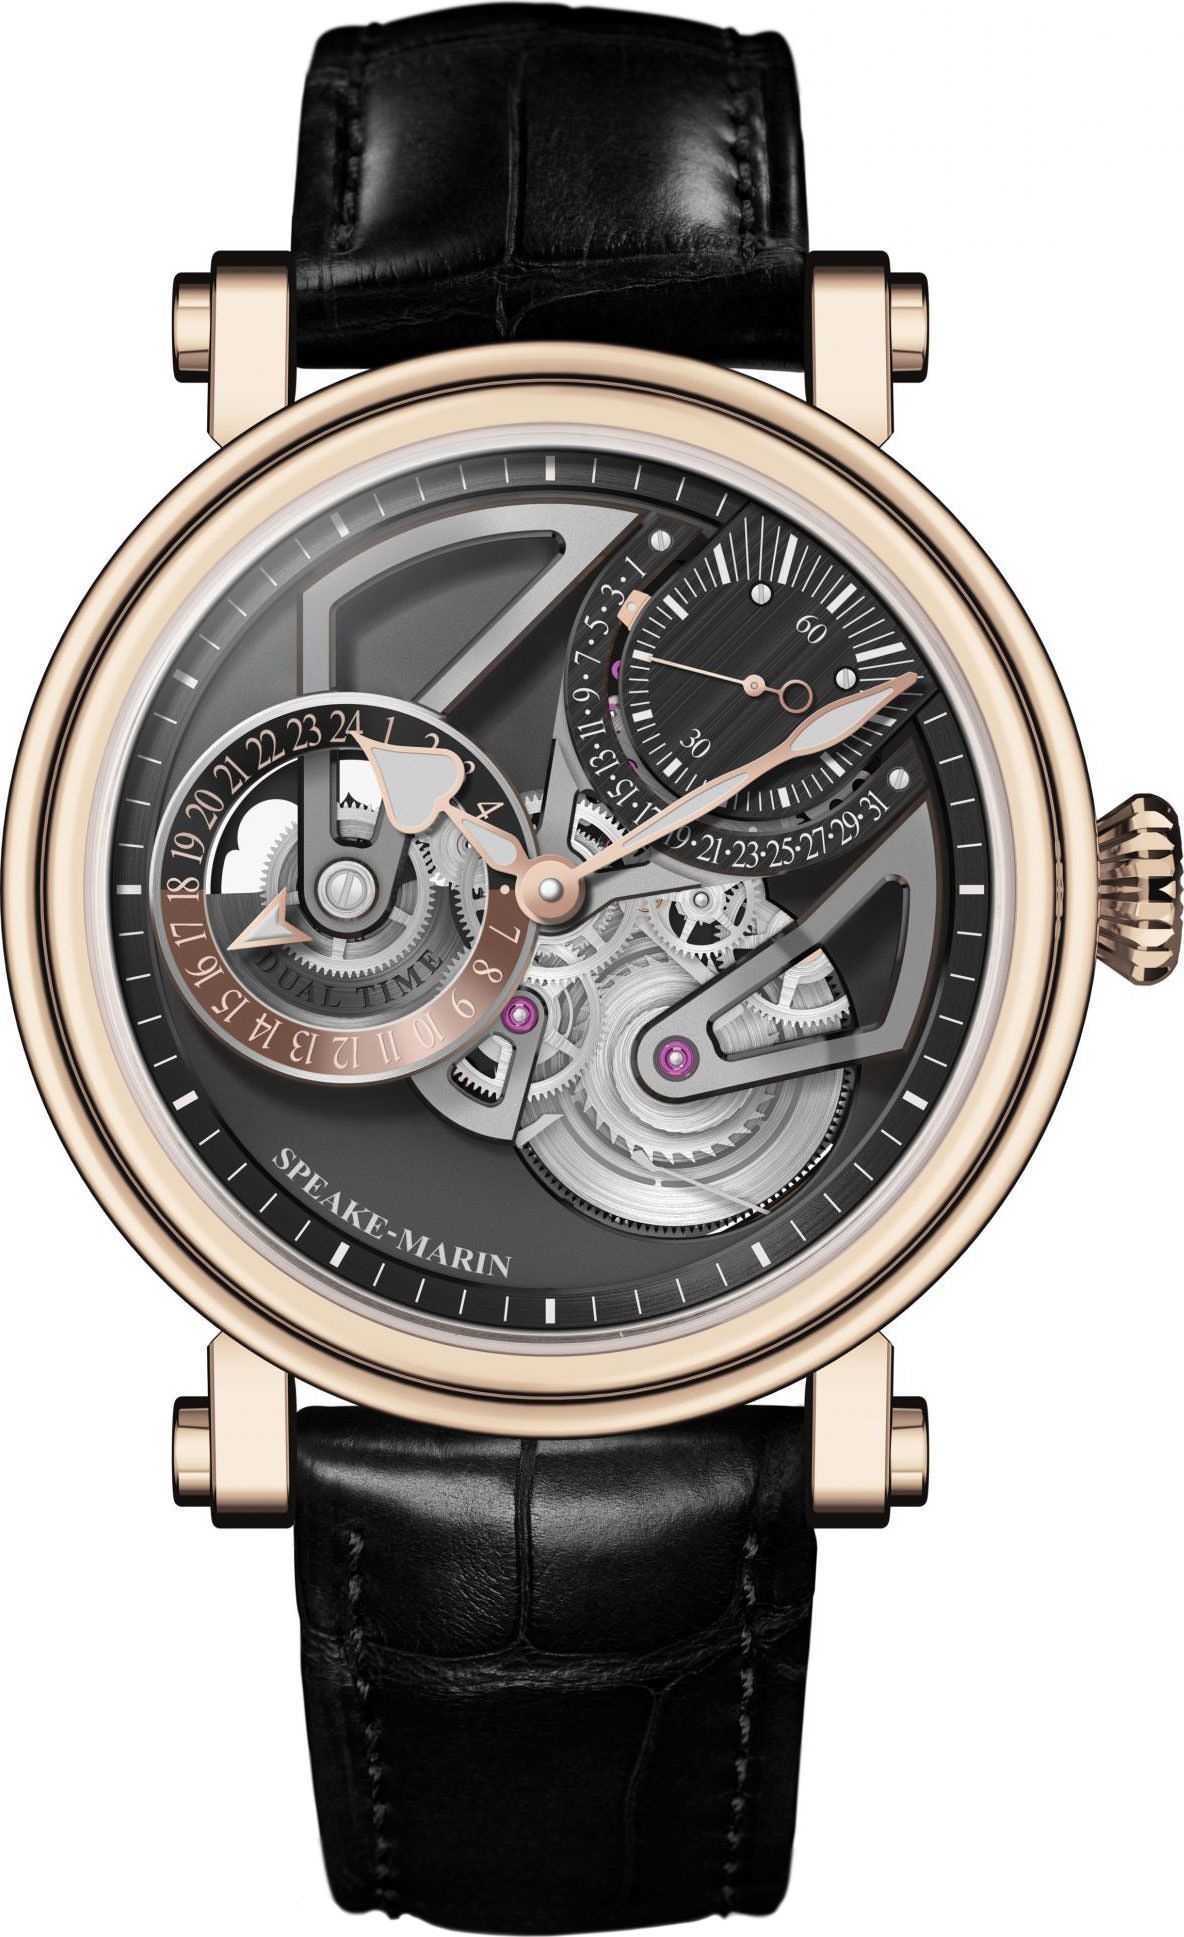 Speake-Marin One & Two Openworked Dual Time Skeleton Dial 42 mm Automatic Watch For Men - 1